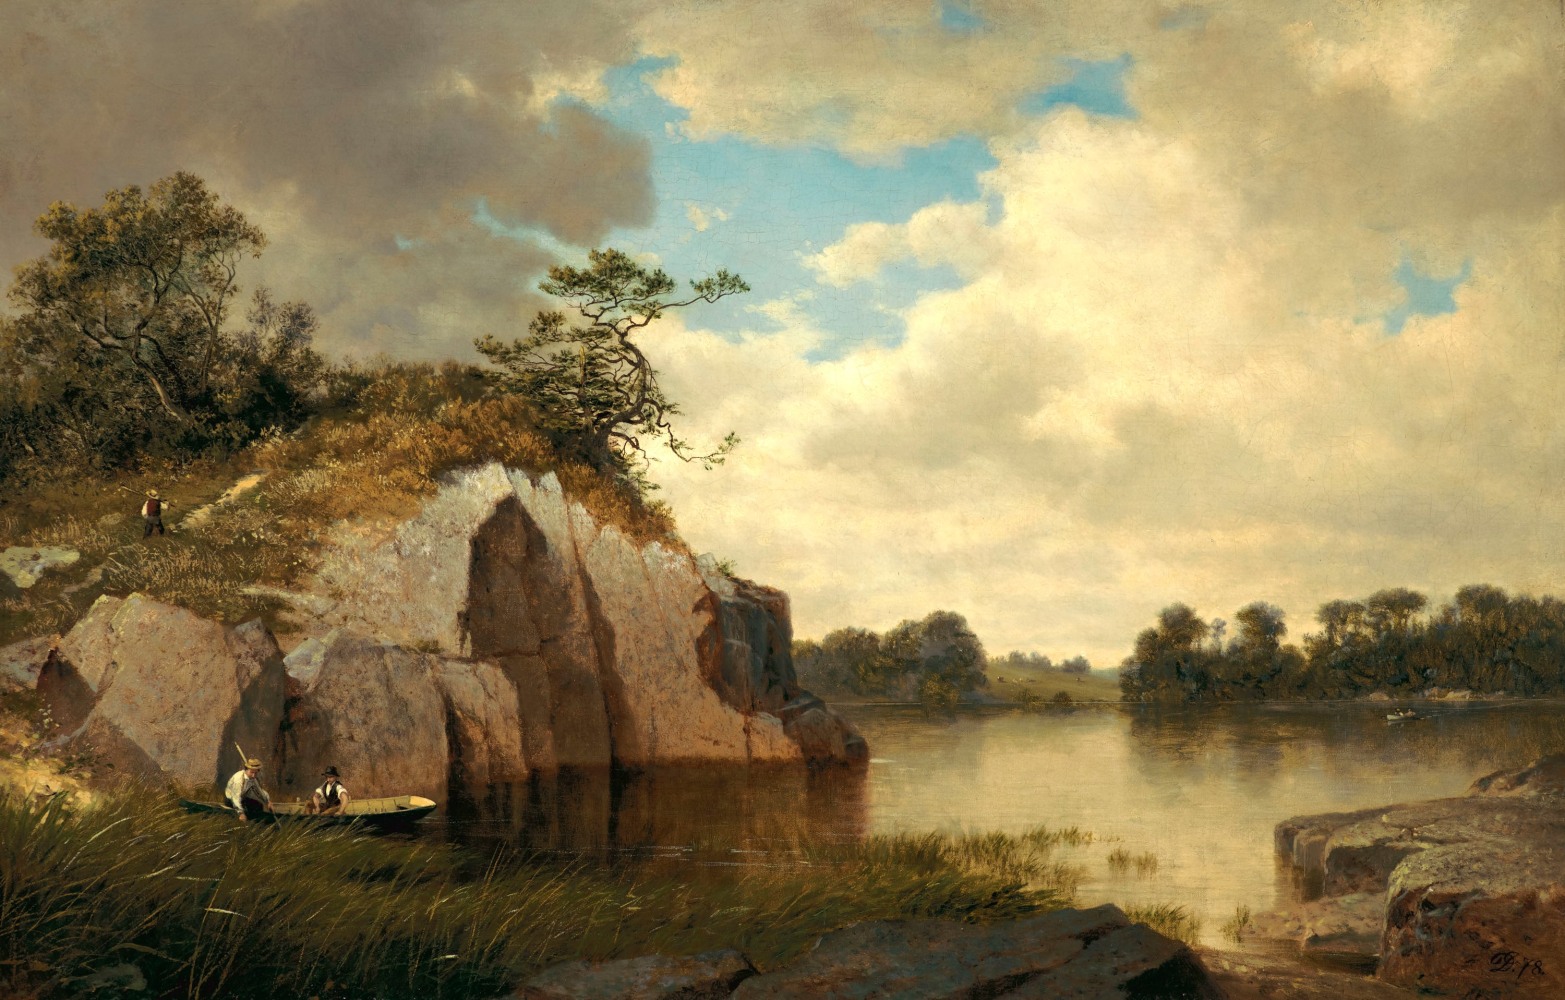 David Johnson (1827–1908), Catnip Island near Greenwich, Connecticut, 1878-79, oil on canvas, 22 x 34 in.,  signed and dated lower right: DJ 78, inscribed on verso: Catnip Island near / Greenwich, / Conn. / David Johnson 1879